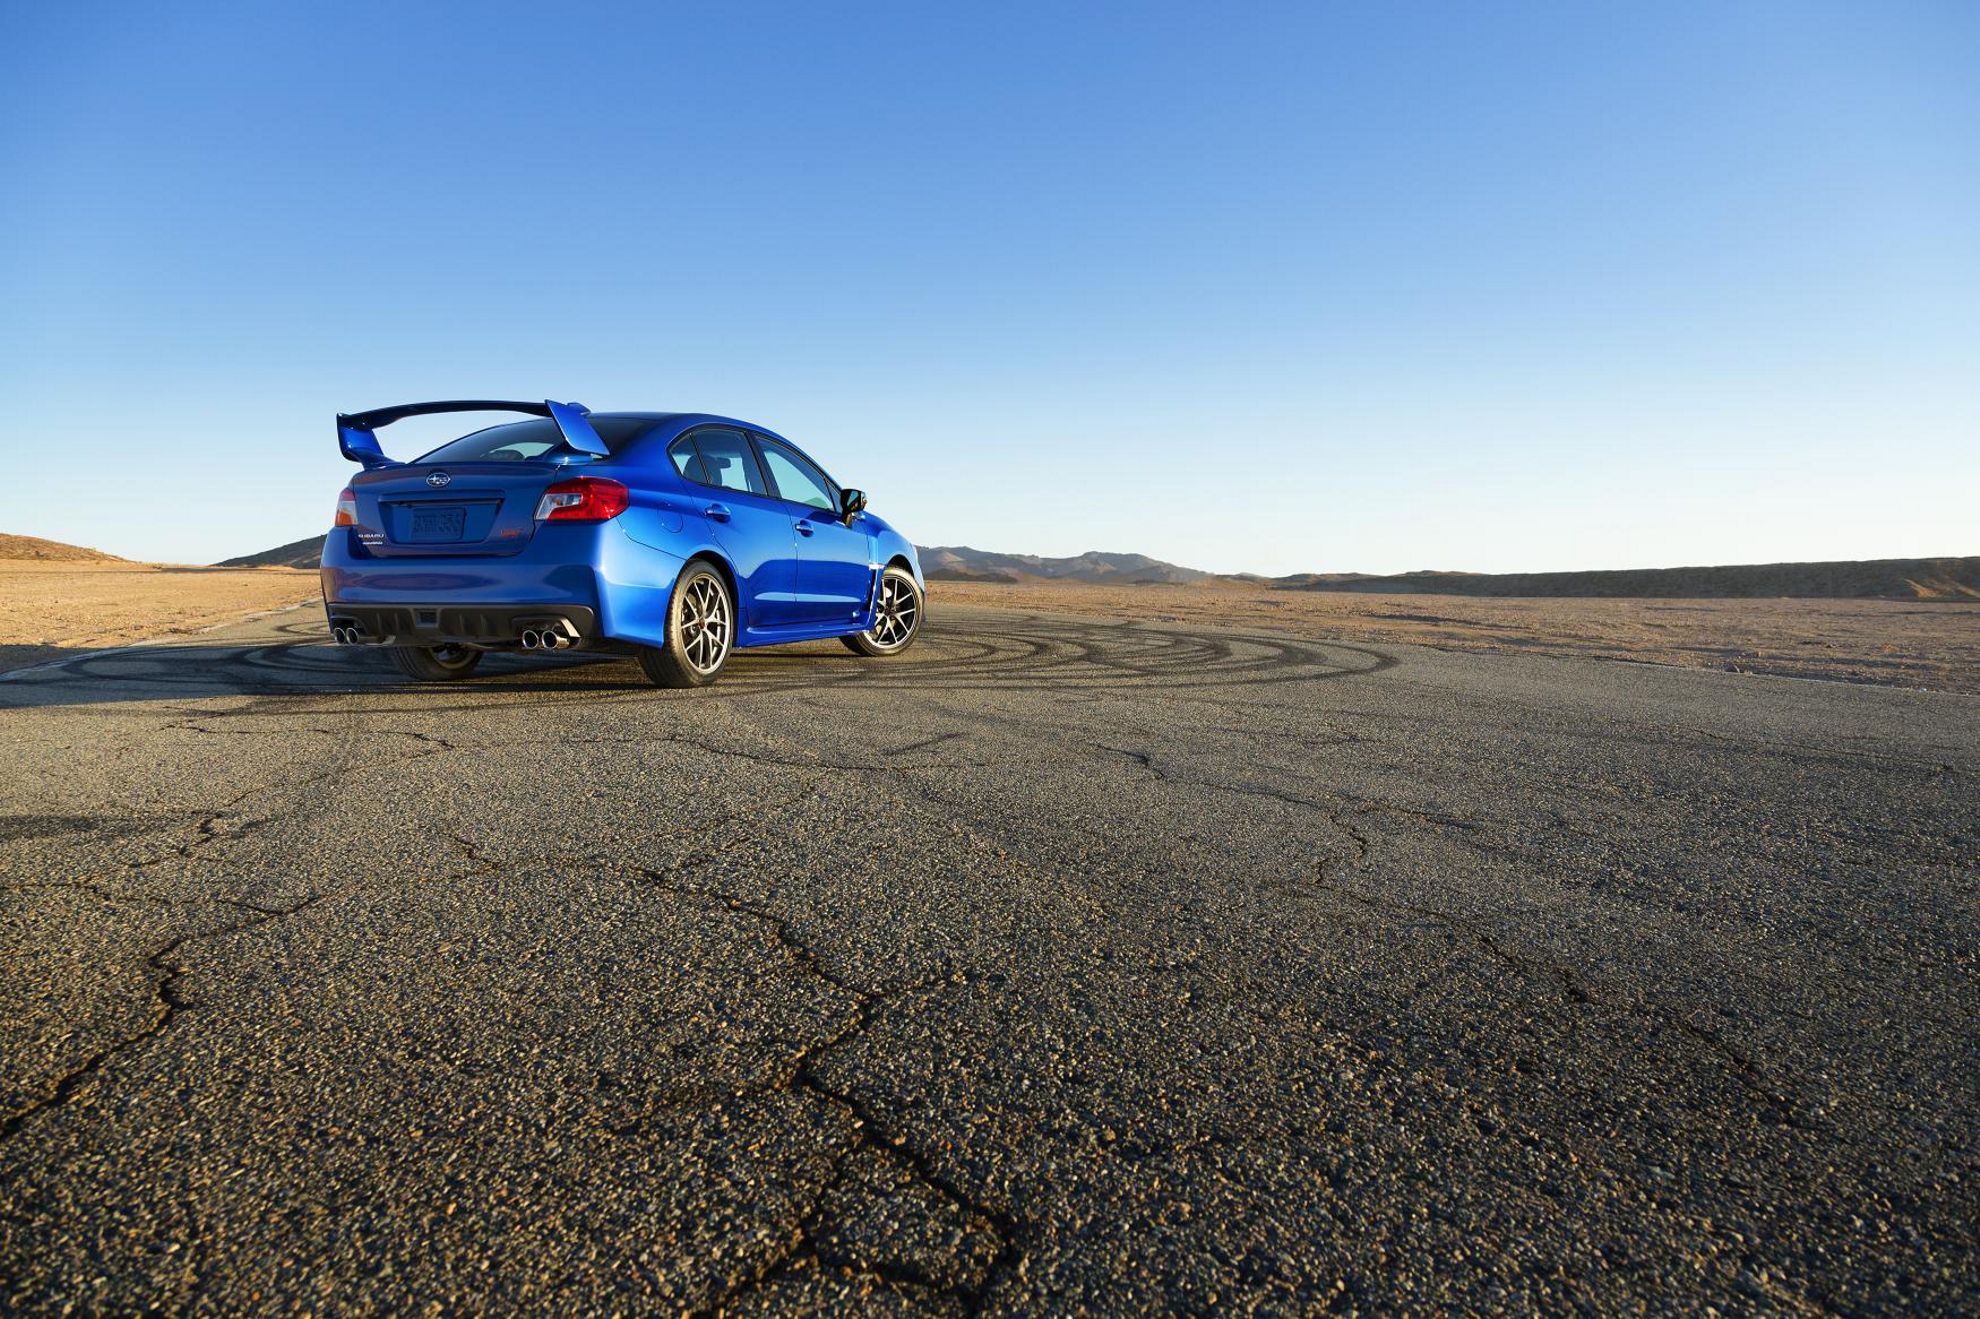 How Much Does a Subaru WRX Cost in the USA?